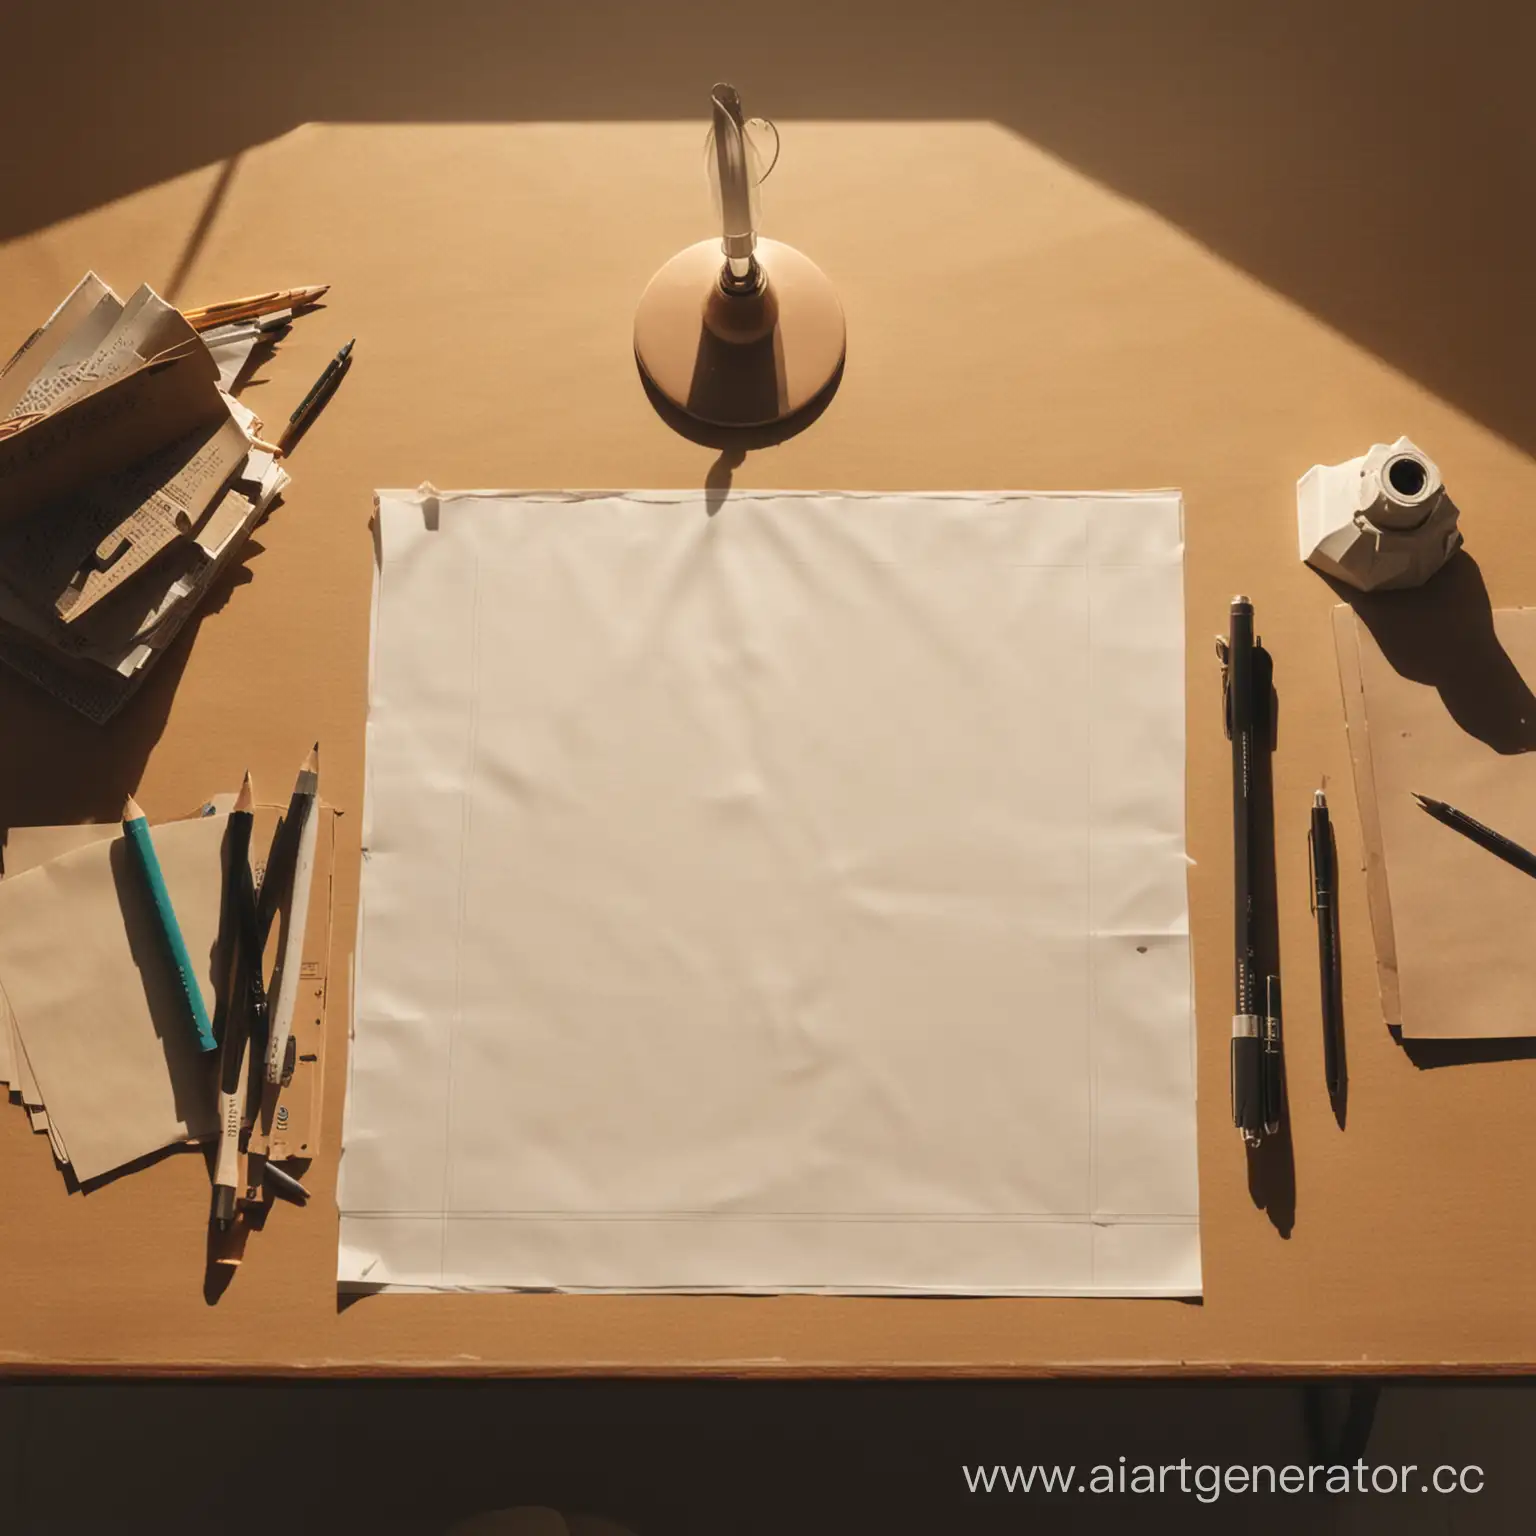 Overhead-View-of-Sunlit-Writing-Desk-with-Album-Paper-and-Writing-Tools